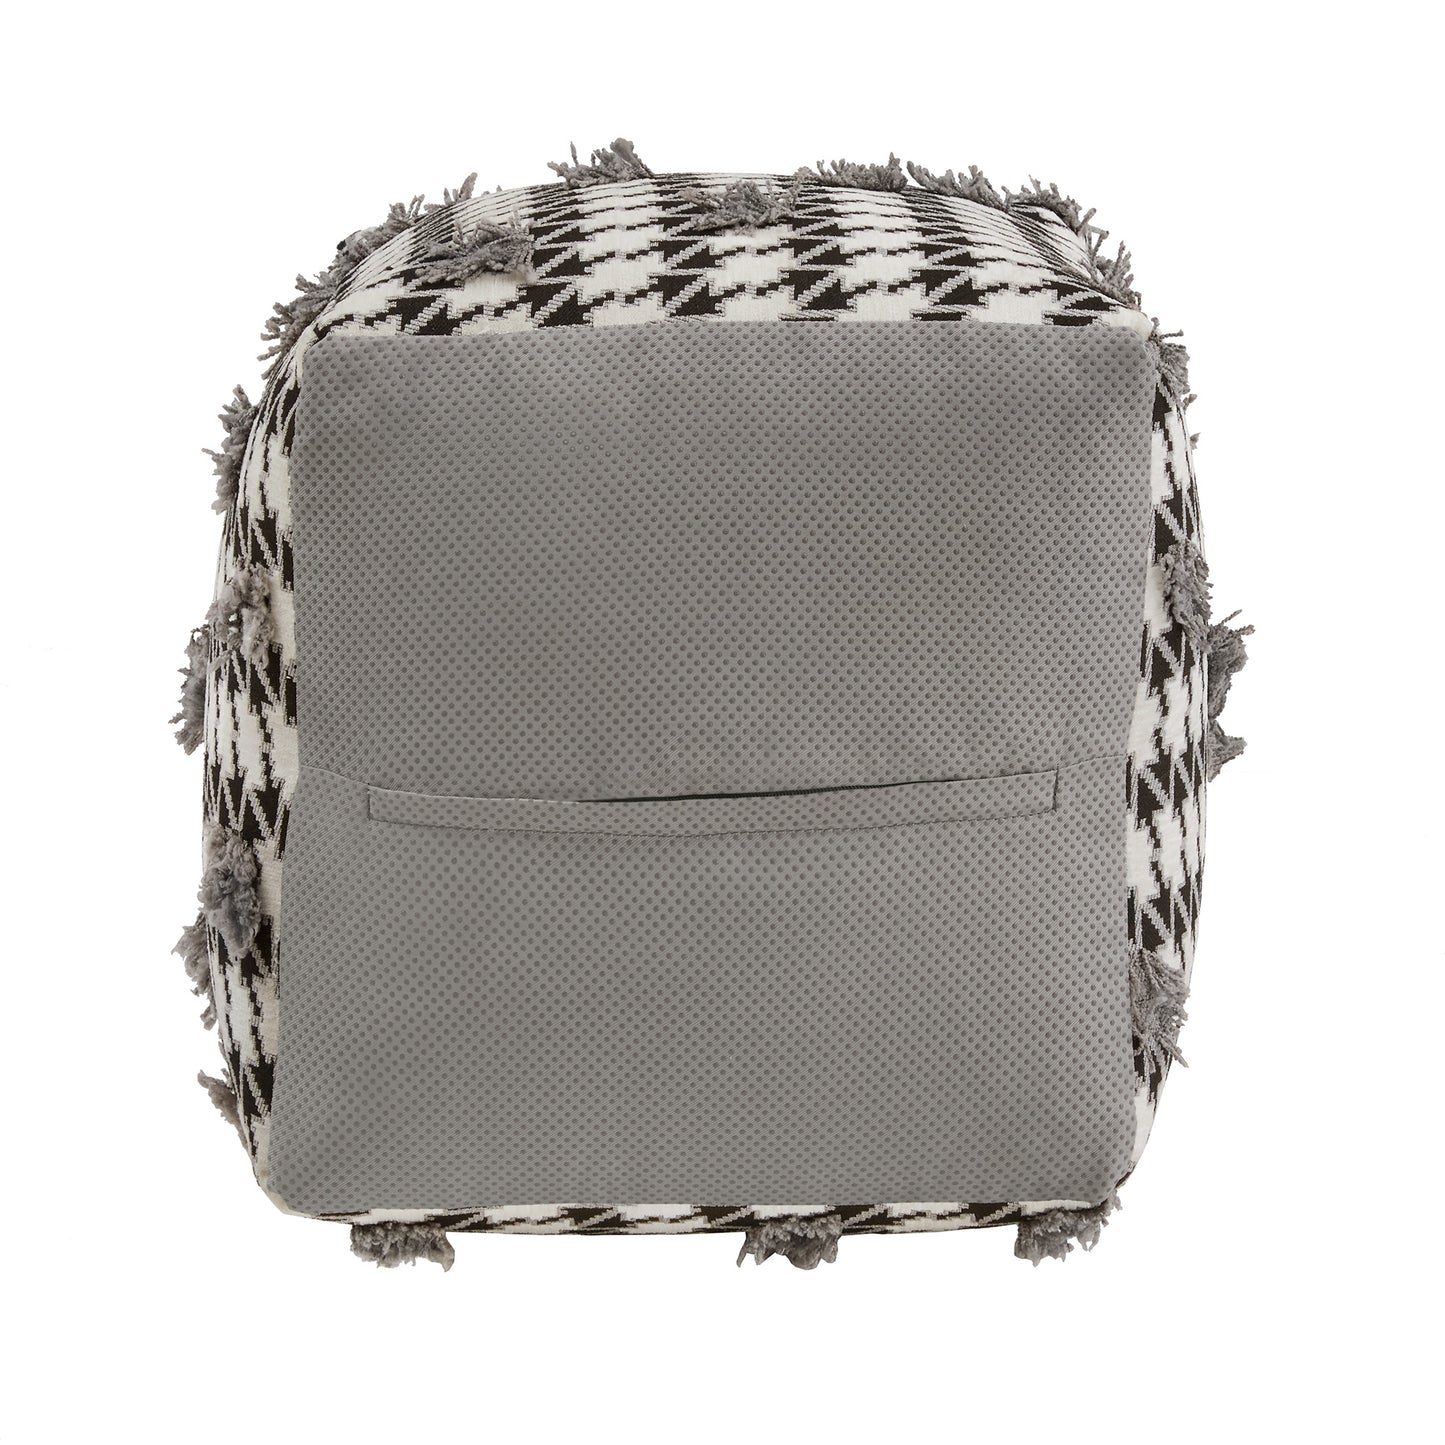 Upholstered Square Pouf Ottoman - Black & White Houndstooth Pattern Fabric With Fringe